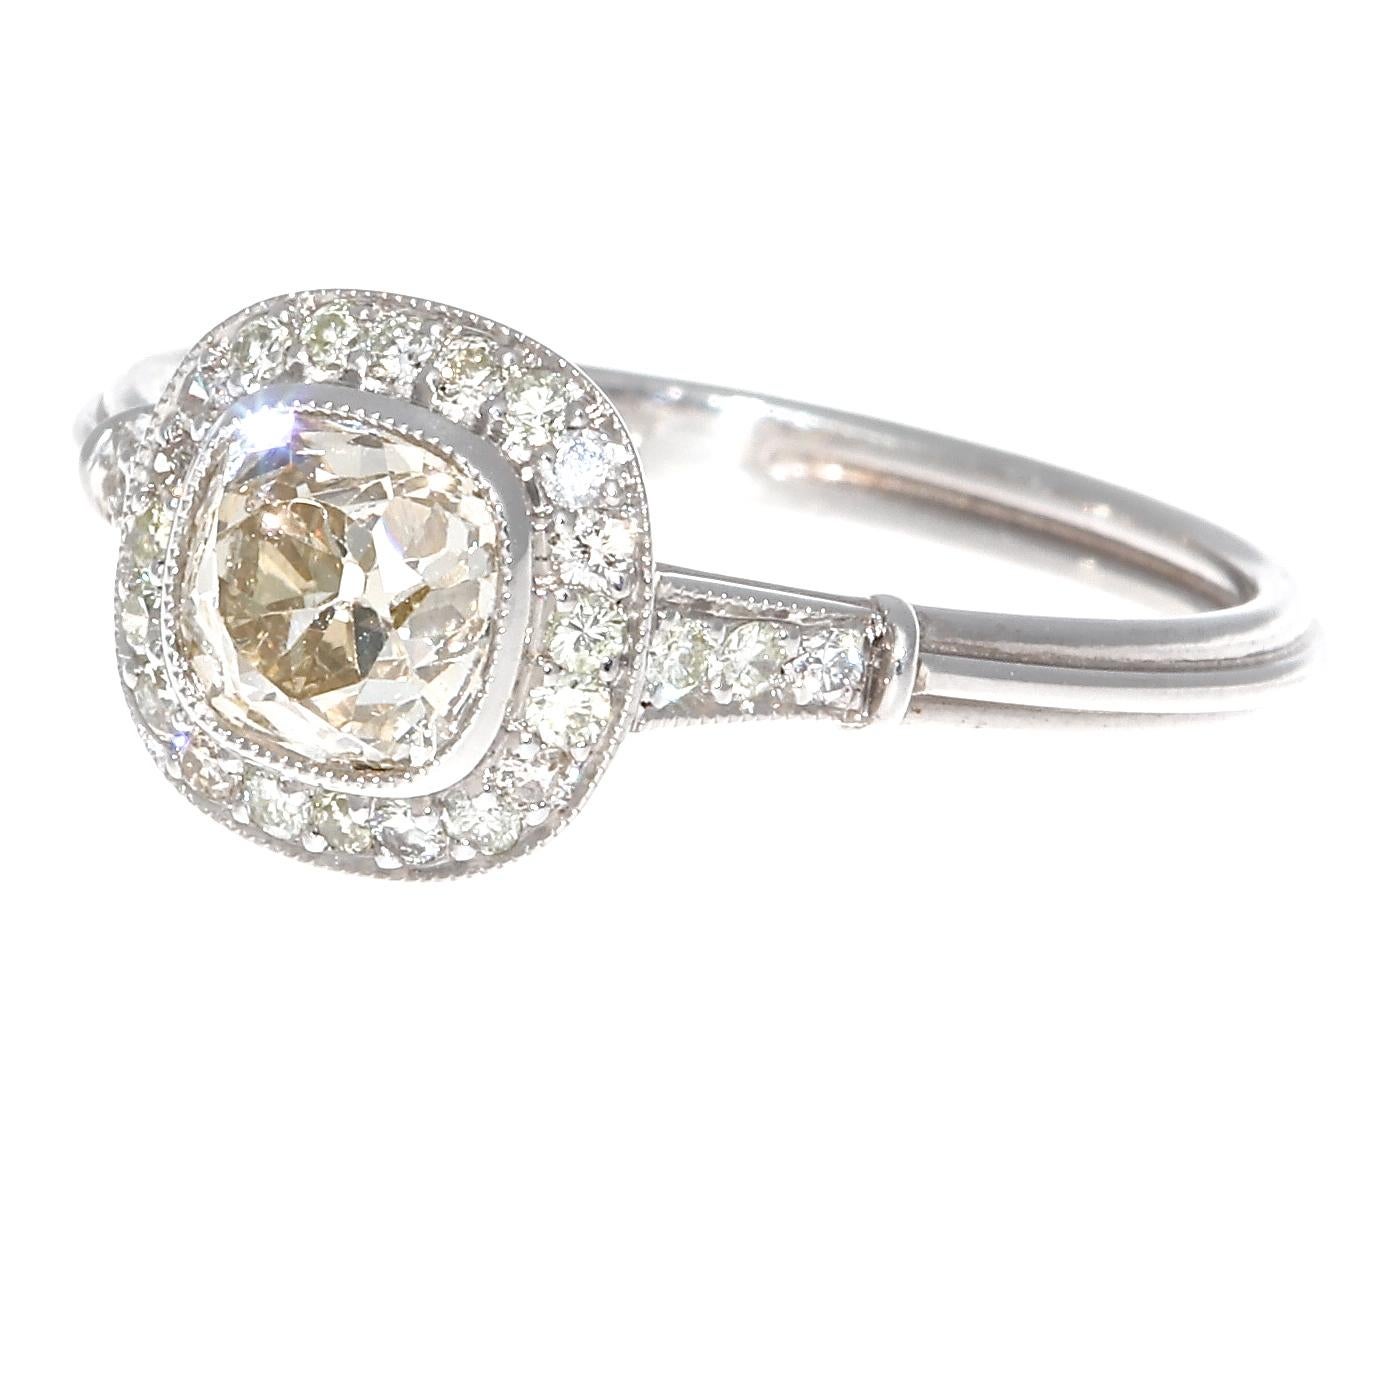 Tradition that lasts as long as a loving marriage. Featuring a 0.87 carat old mine cut diamond that displays a lovely natural light champagne color. Perfectly accented by a halo of near colorless diamonds. Hand crafted in platinum, ring size 7 and